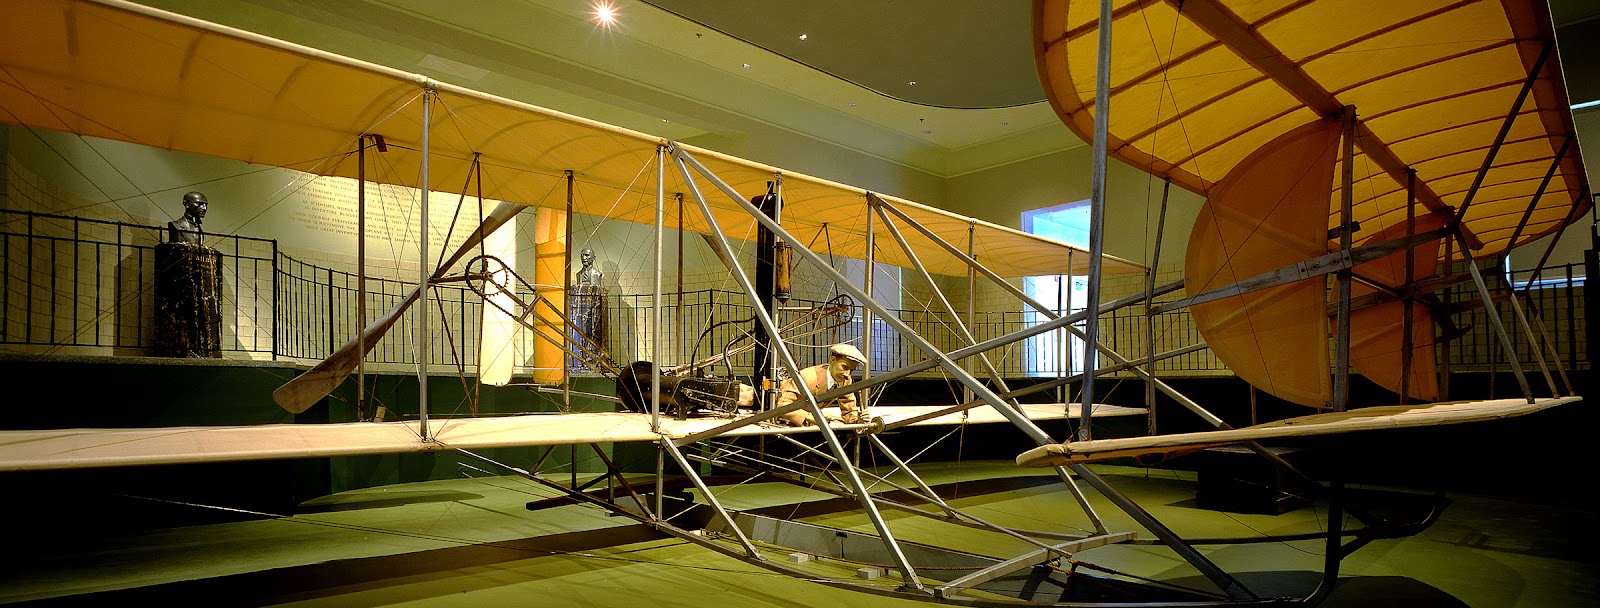 1905 Wright Flyer III at Wright Brothers National Museum